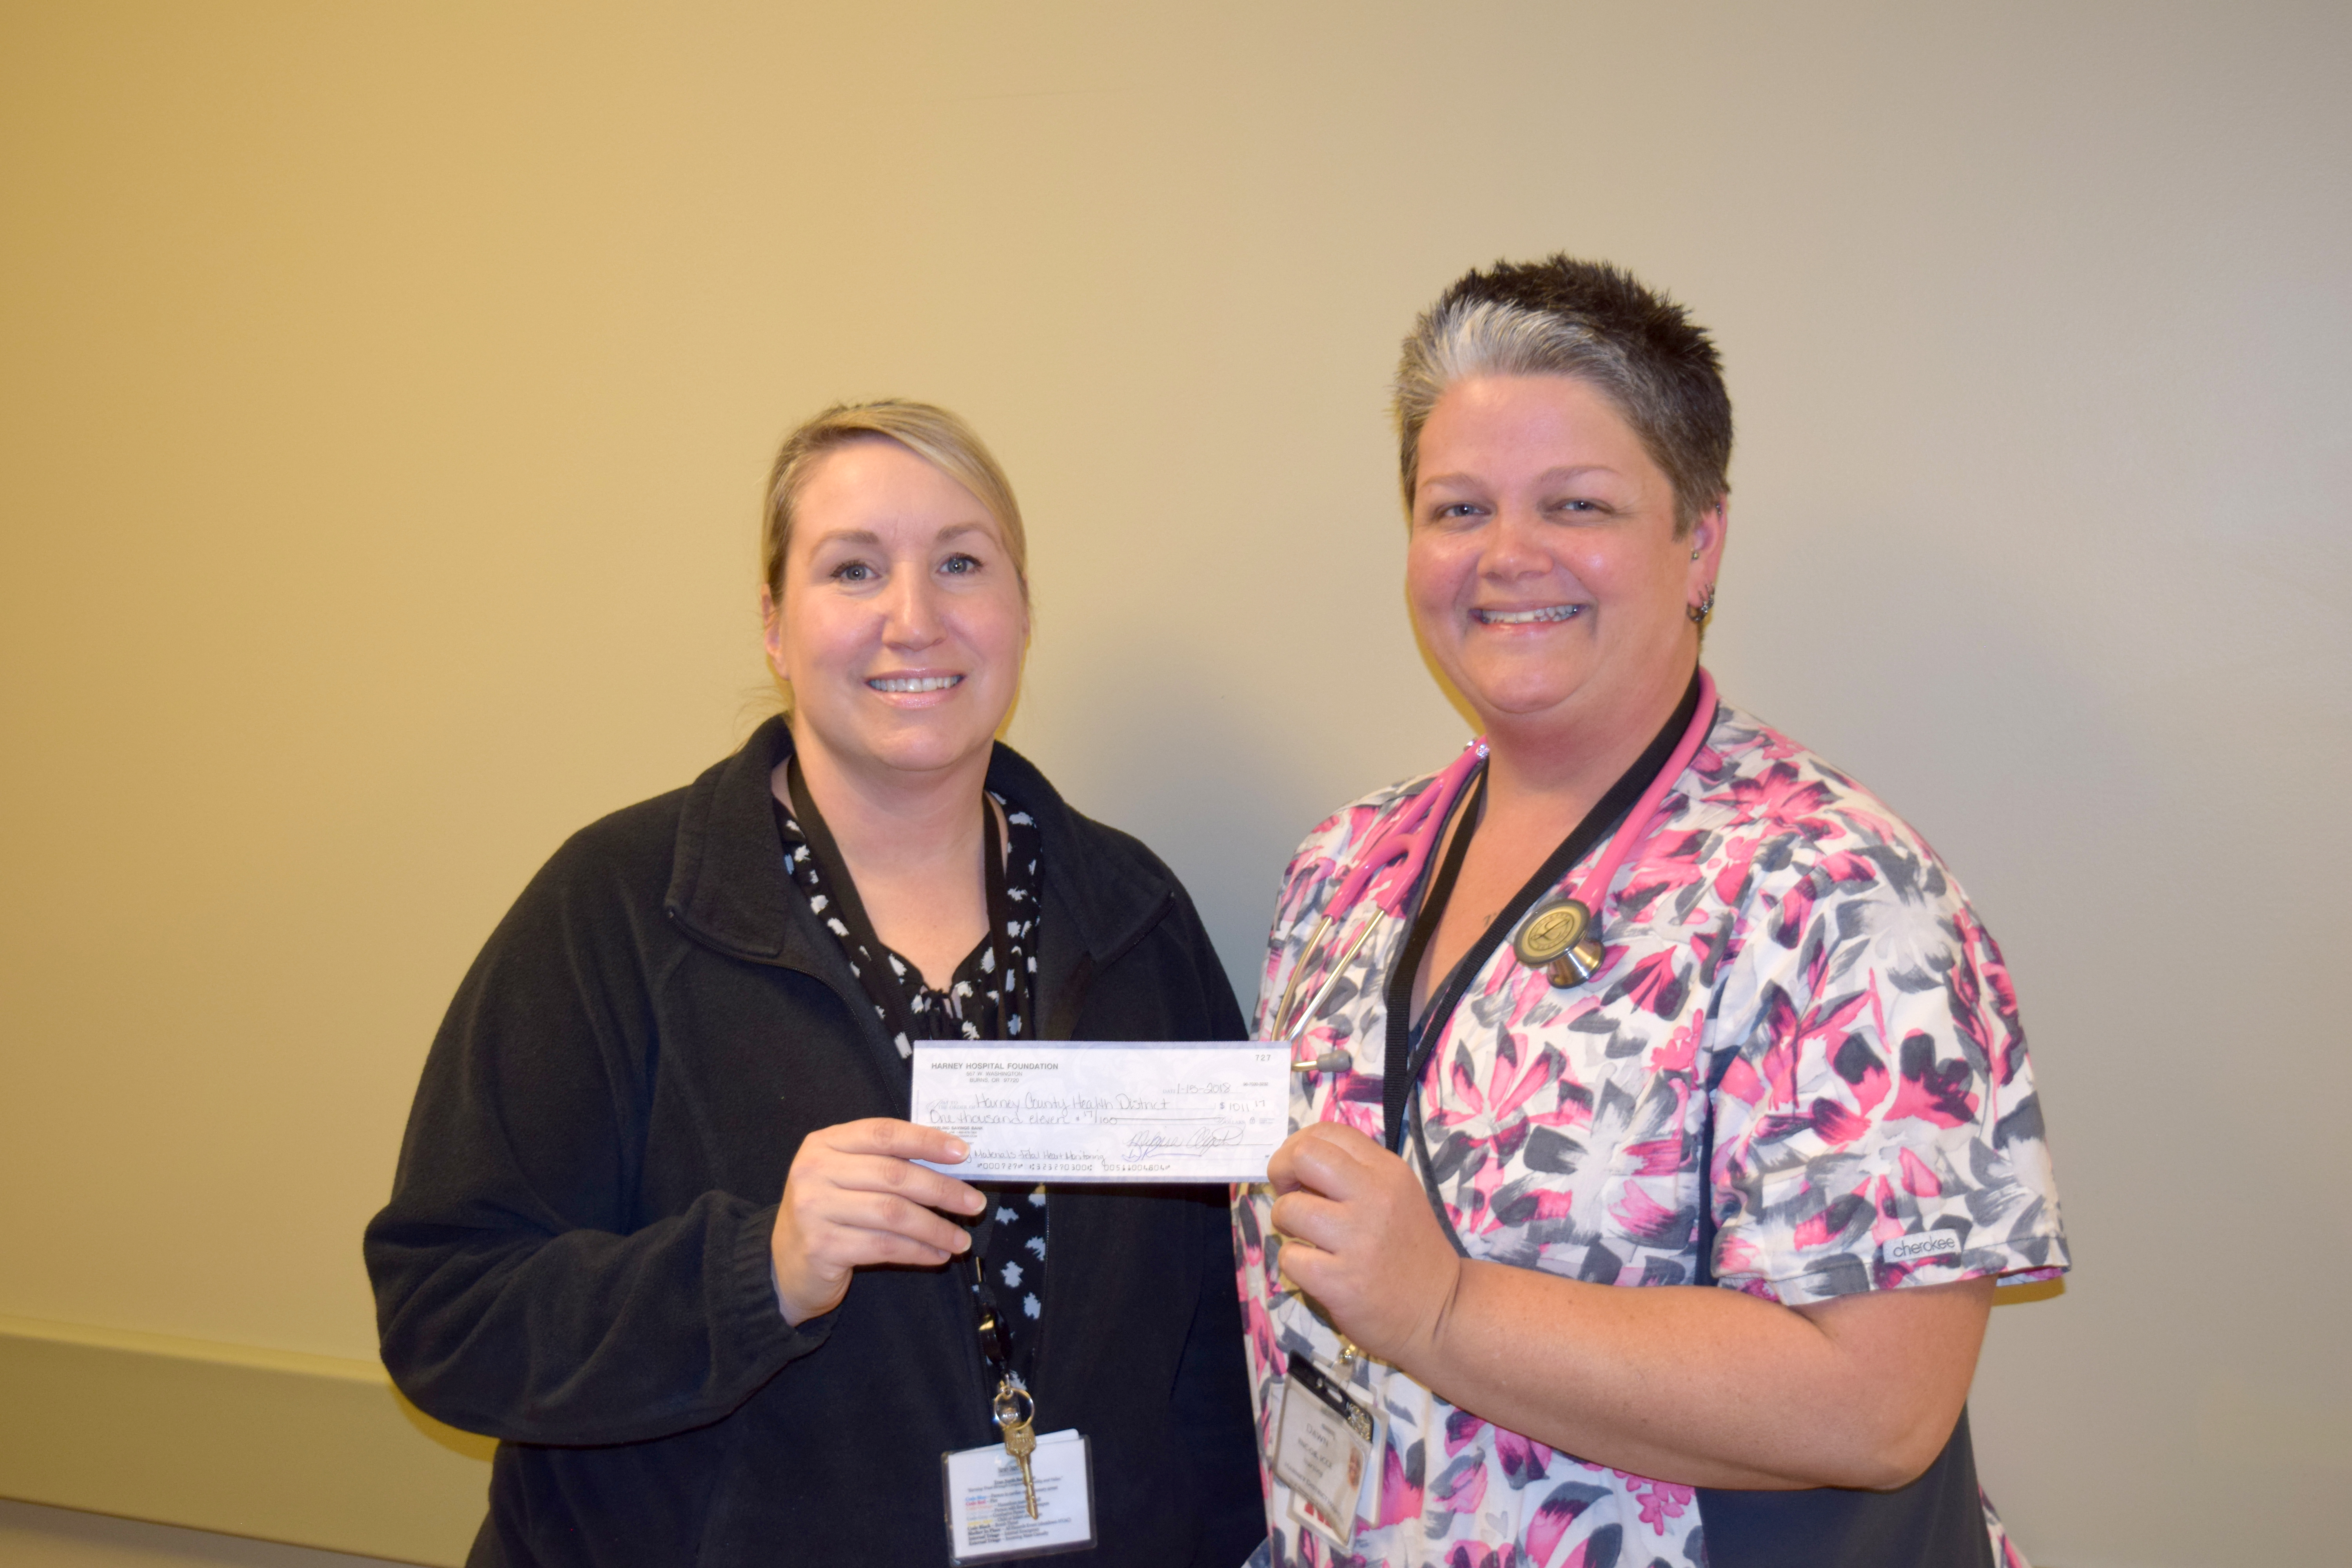 Harney Hospital Foundation Manager Jeni Stevens presents a check to HDH Nurse Dawn Marten for the purchase of fetal heart monitoring educational materials for HDH nursing staff.